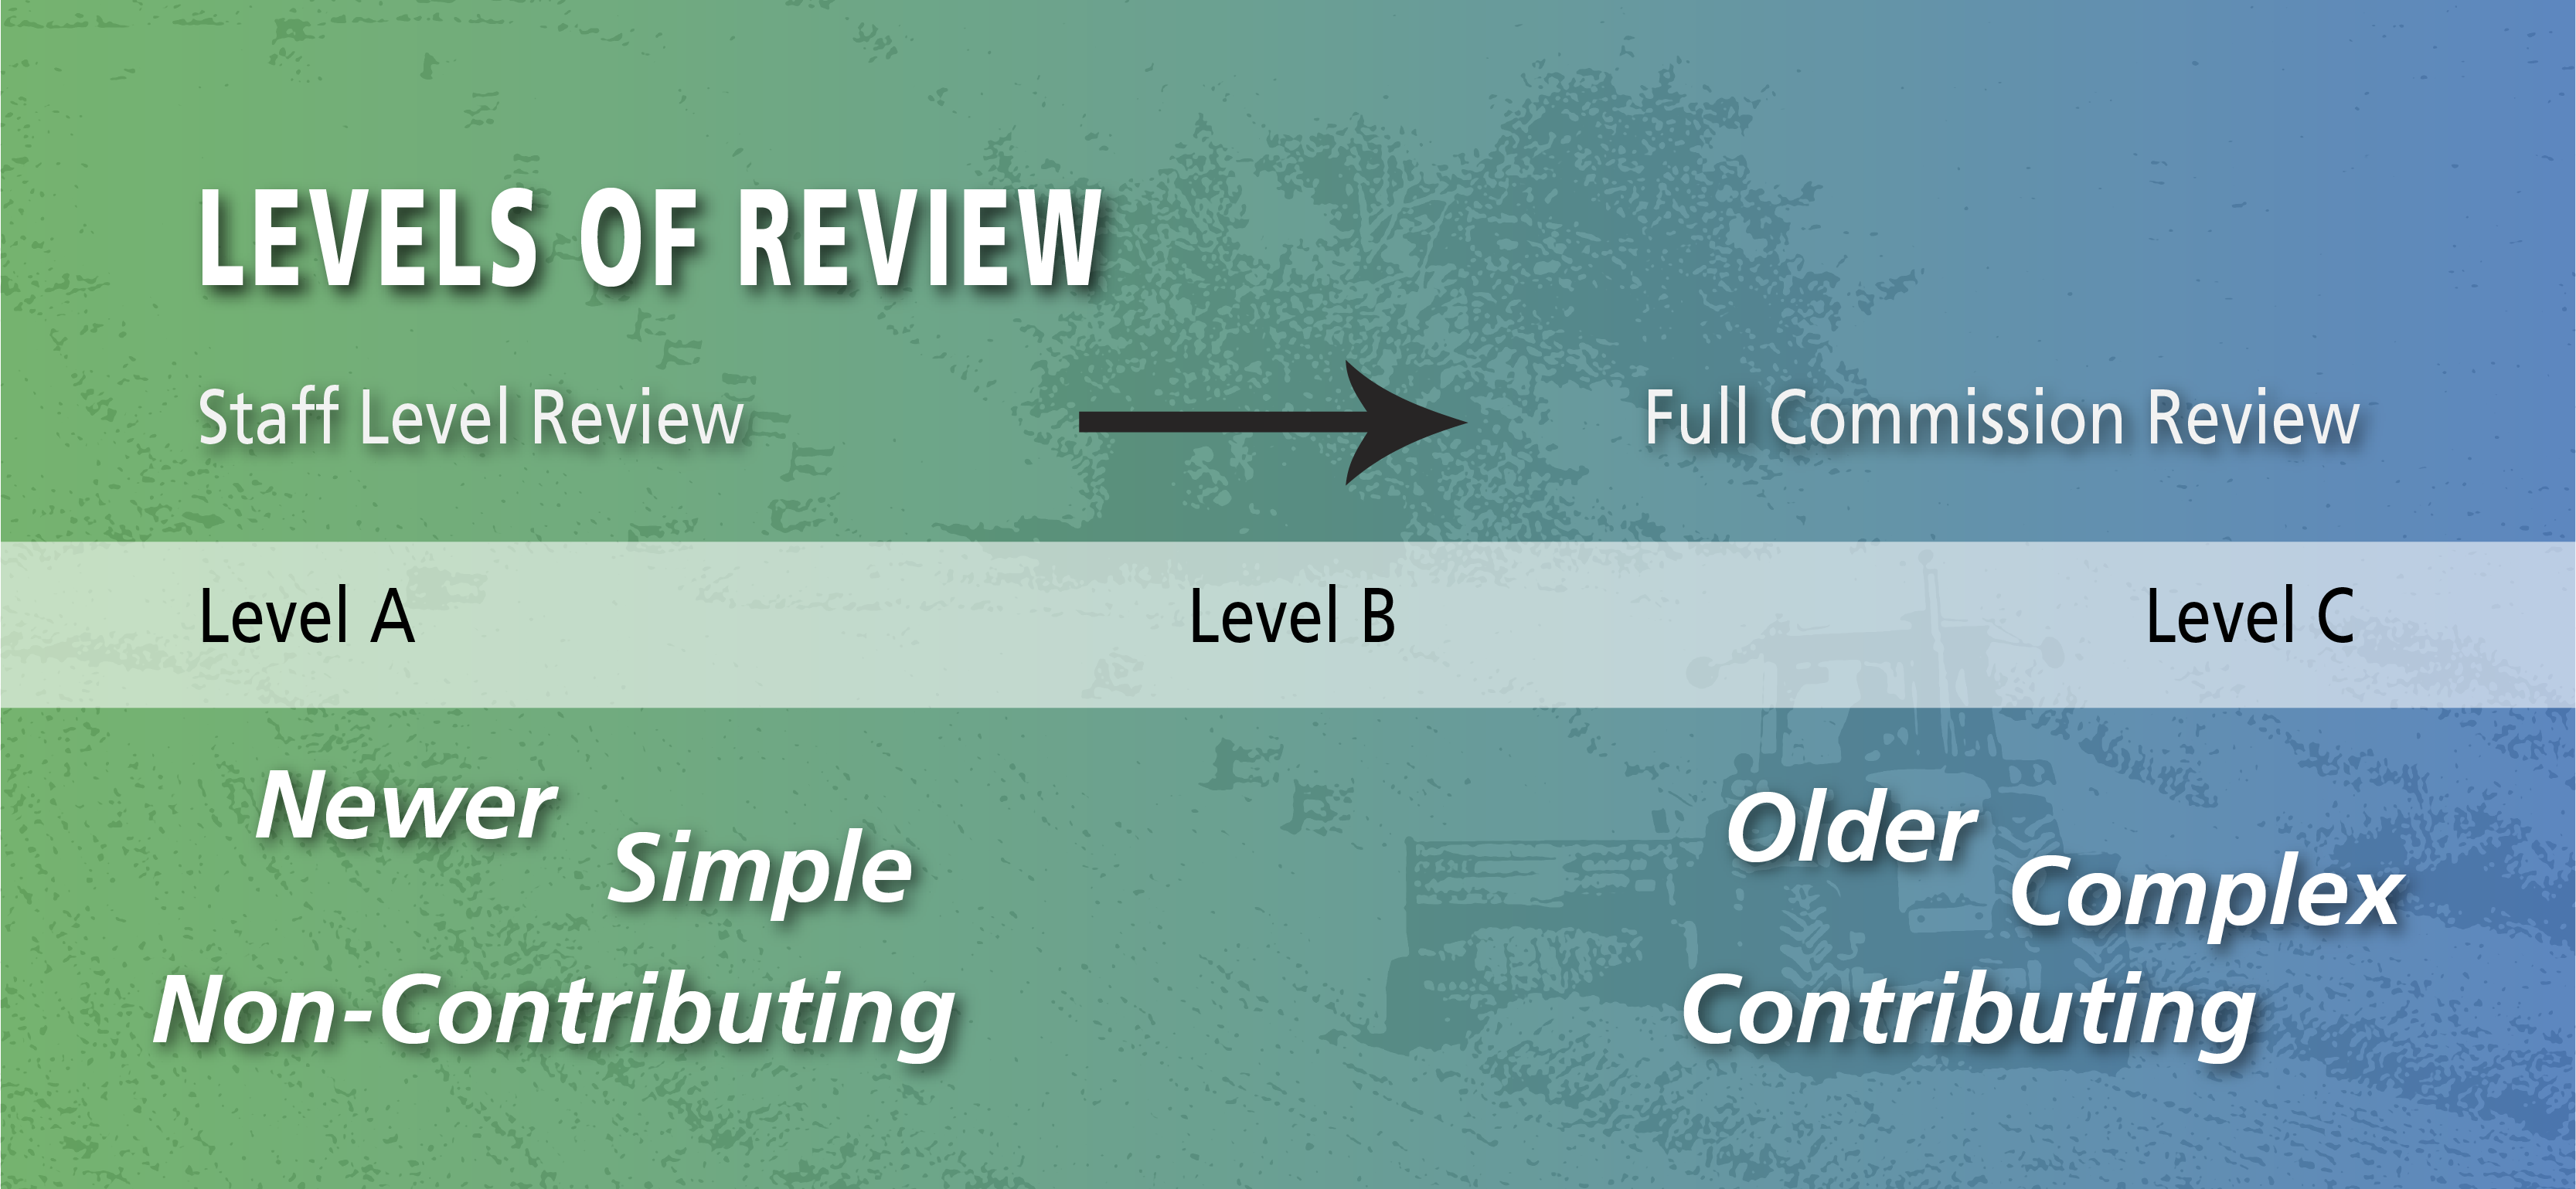 There are three levels of Design Review that increase in complexity from A to C.